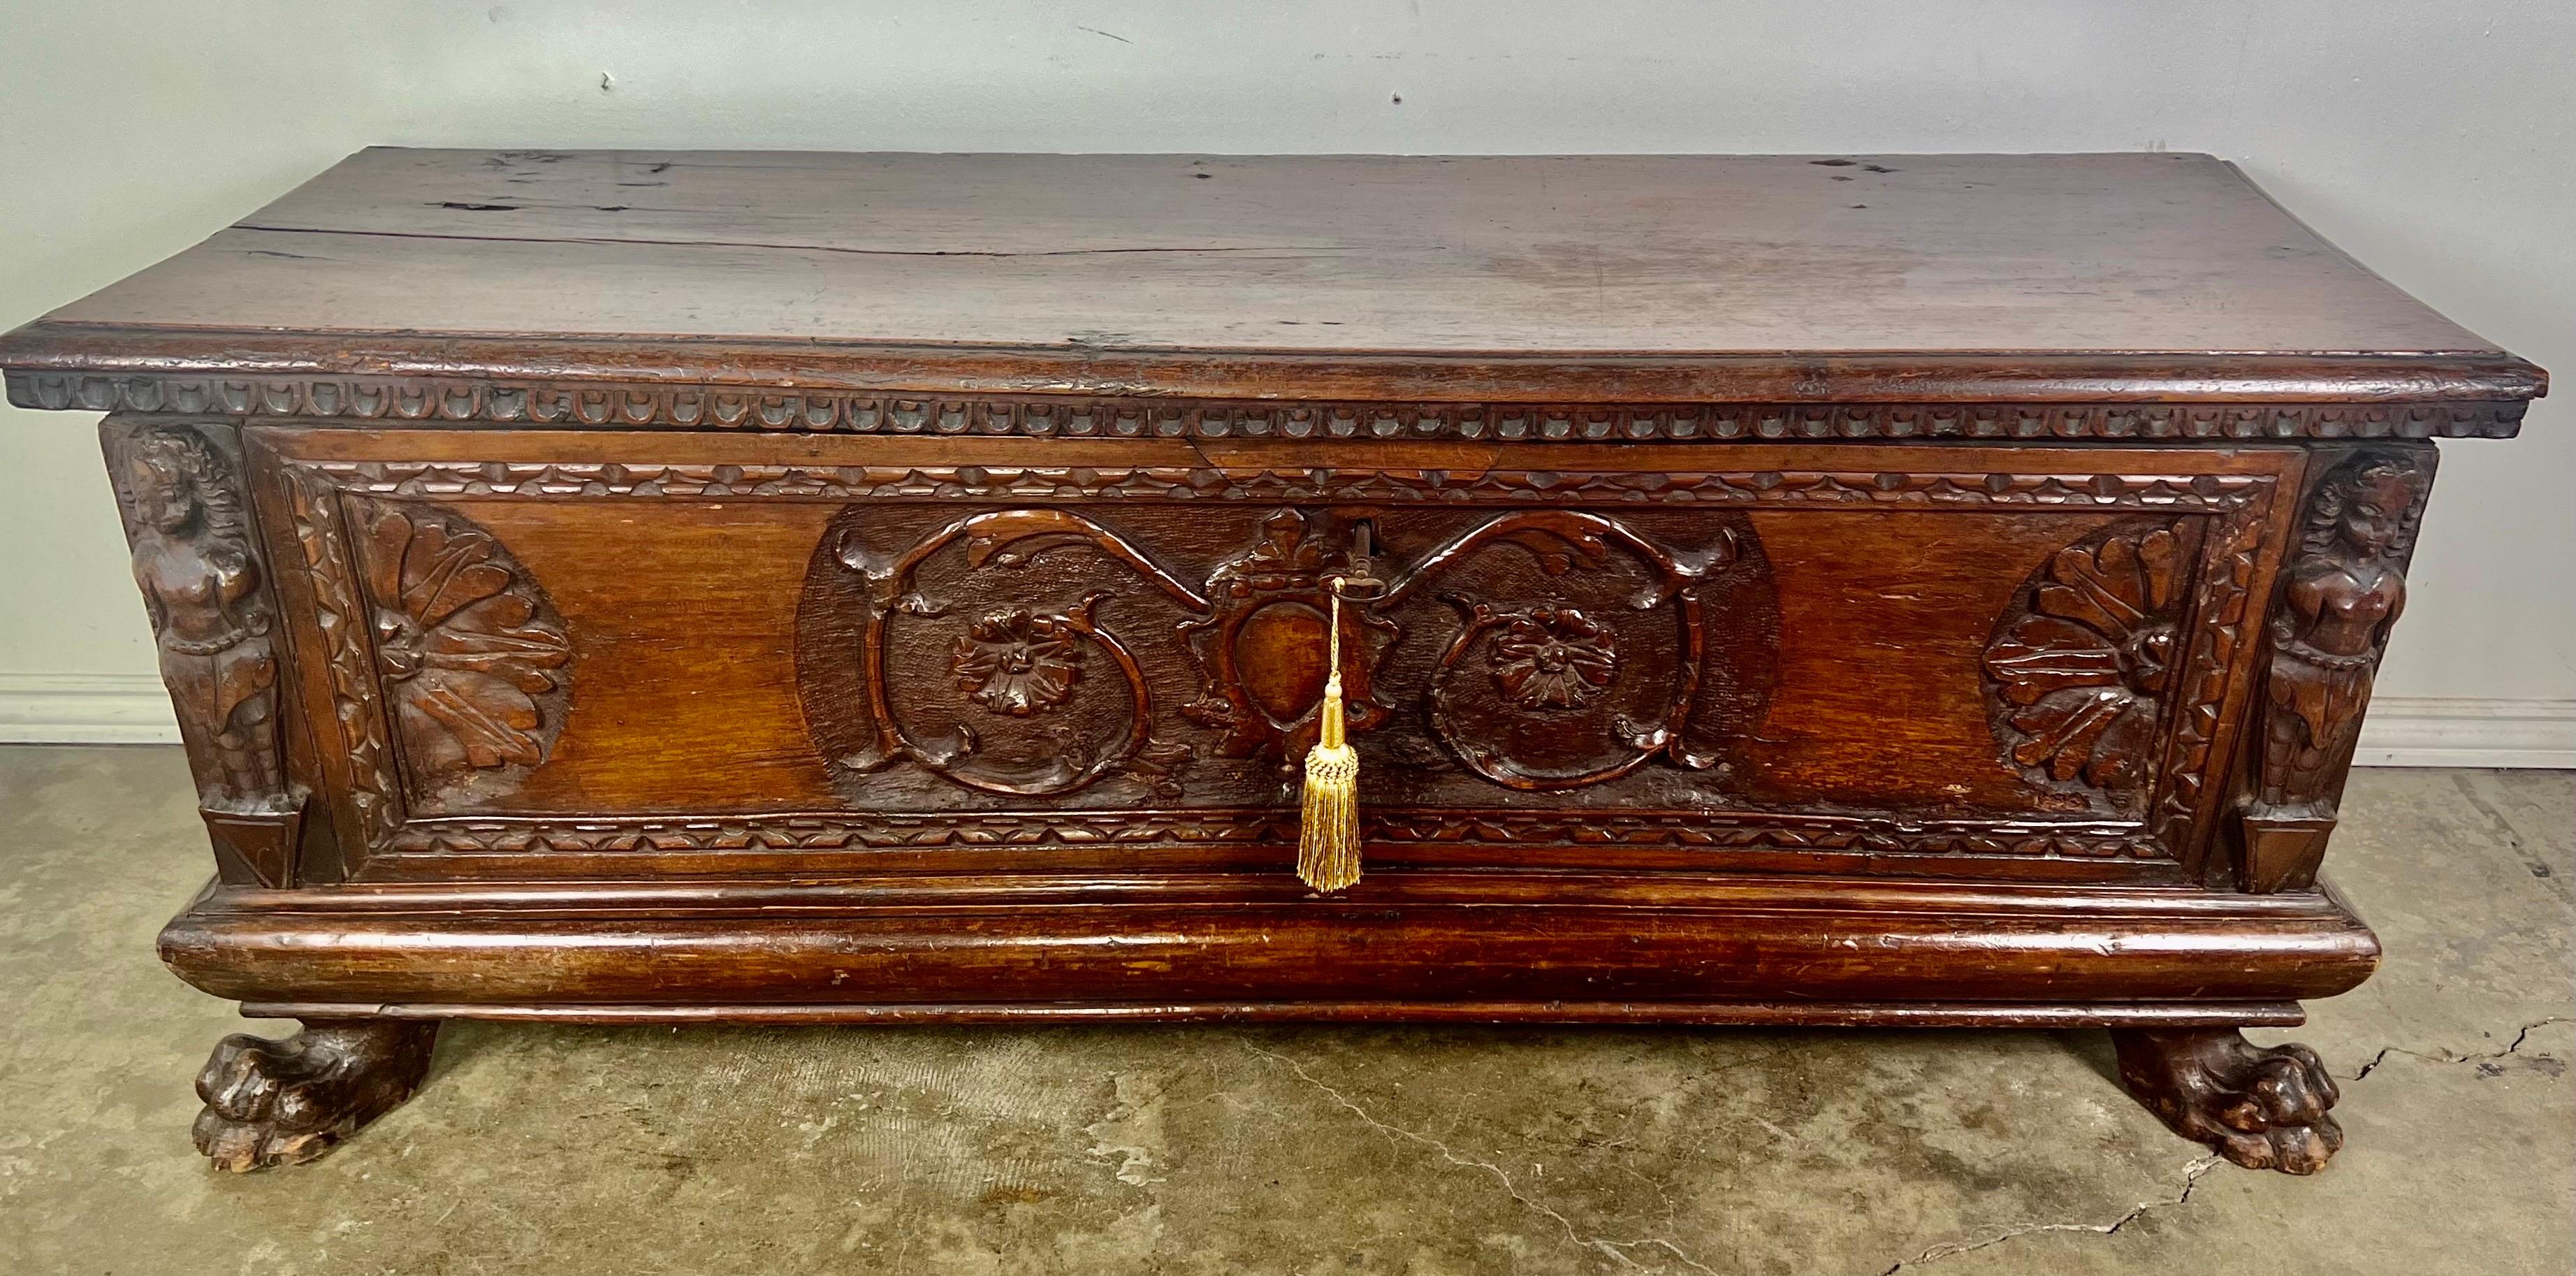 Early 19th century Italian walnut cassone.  It has two carved lion paw feet in the front.  The carving depicts a center cartouche flanked by two scrolled vines ending in center flowers.  There are two figures on either side of the piece.  The walnut